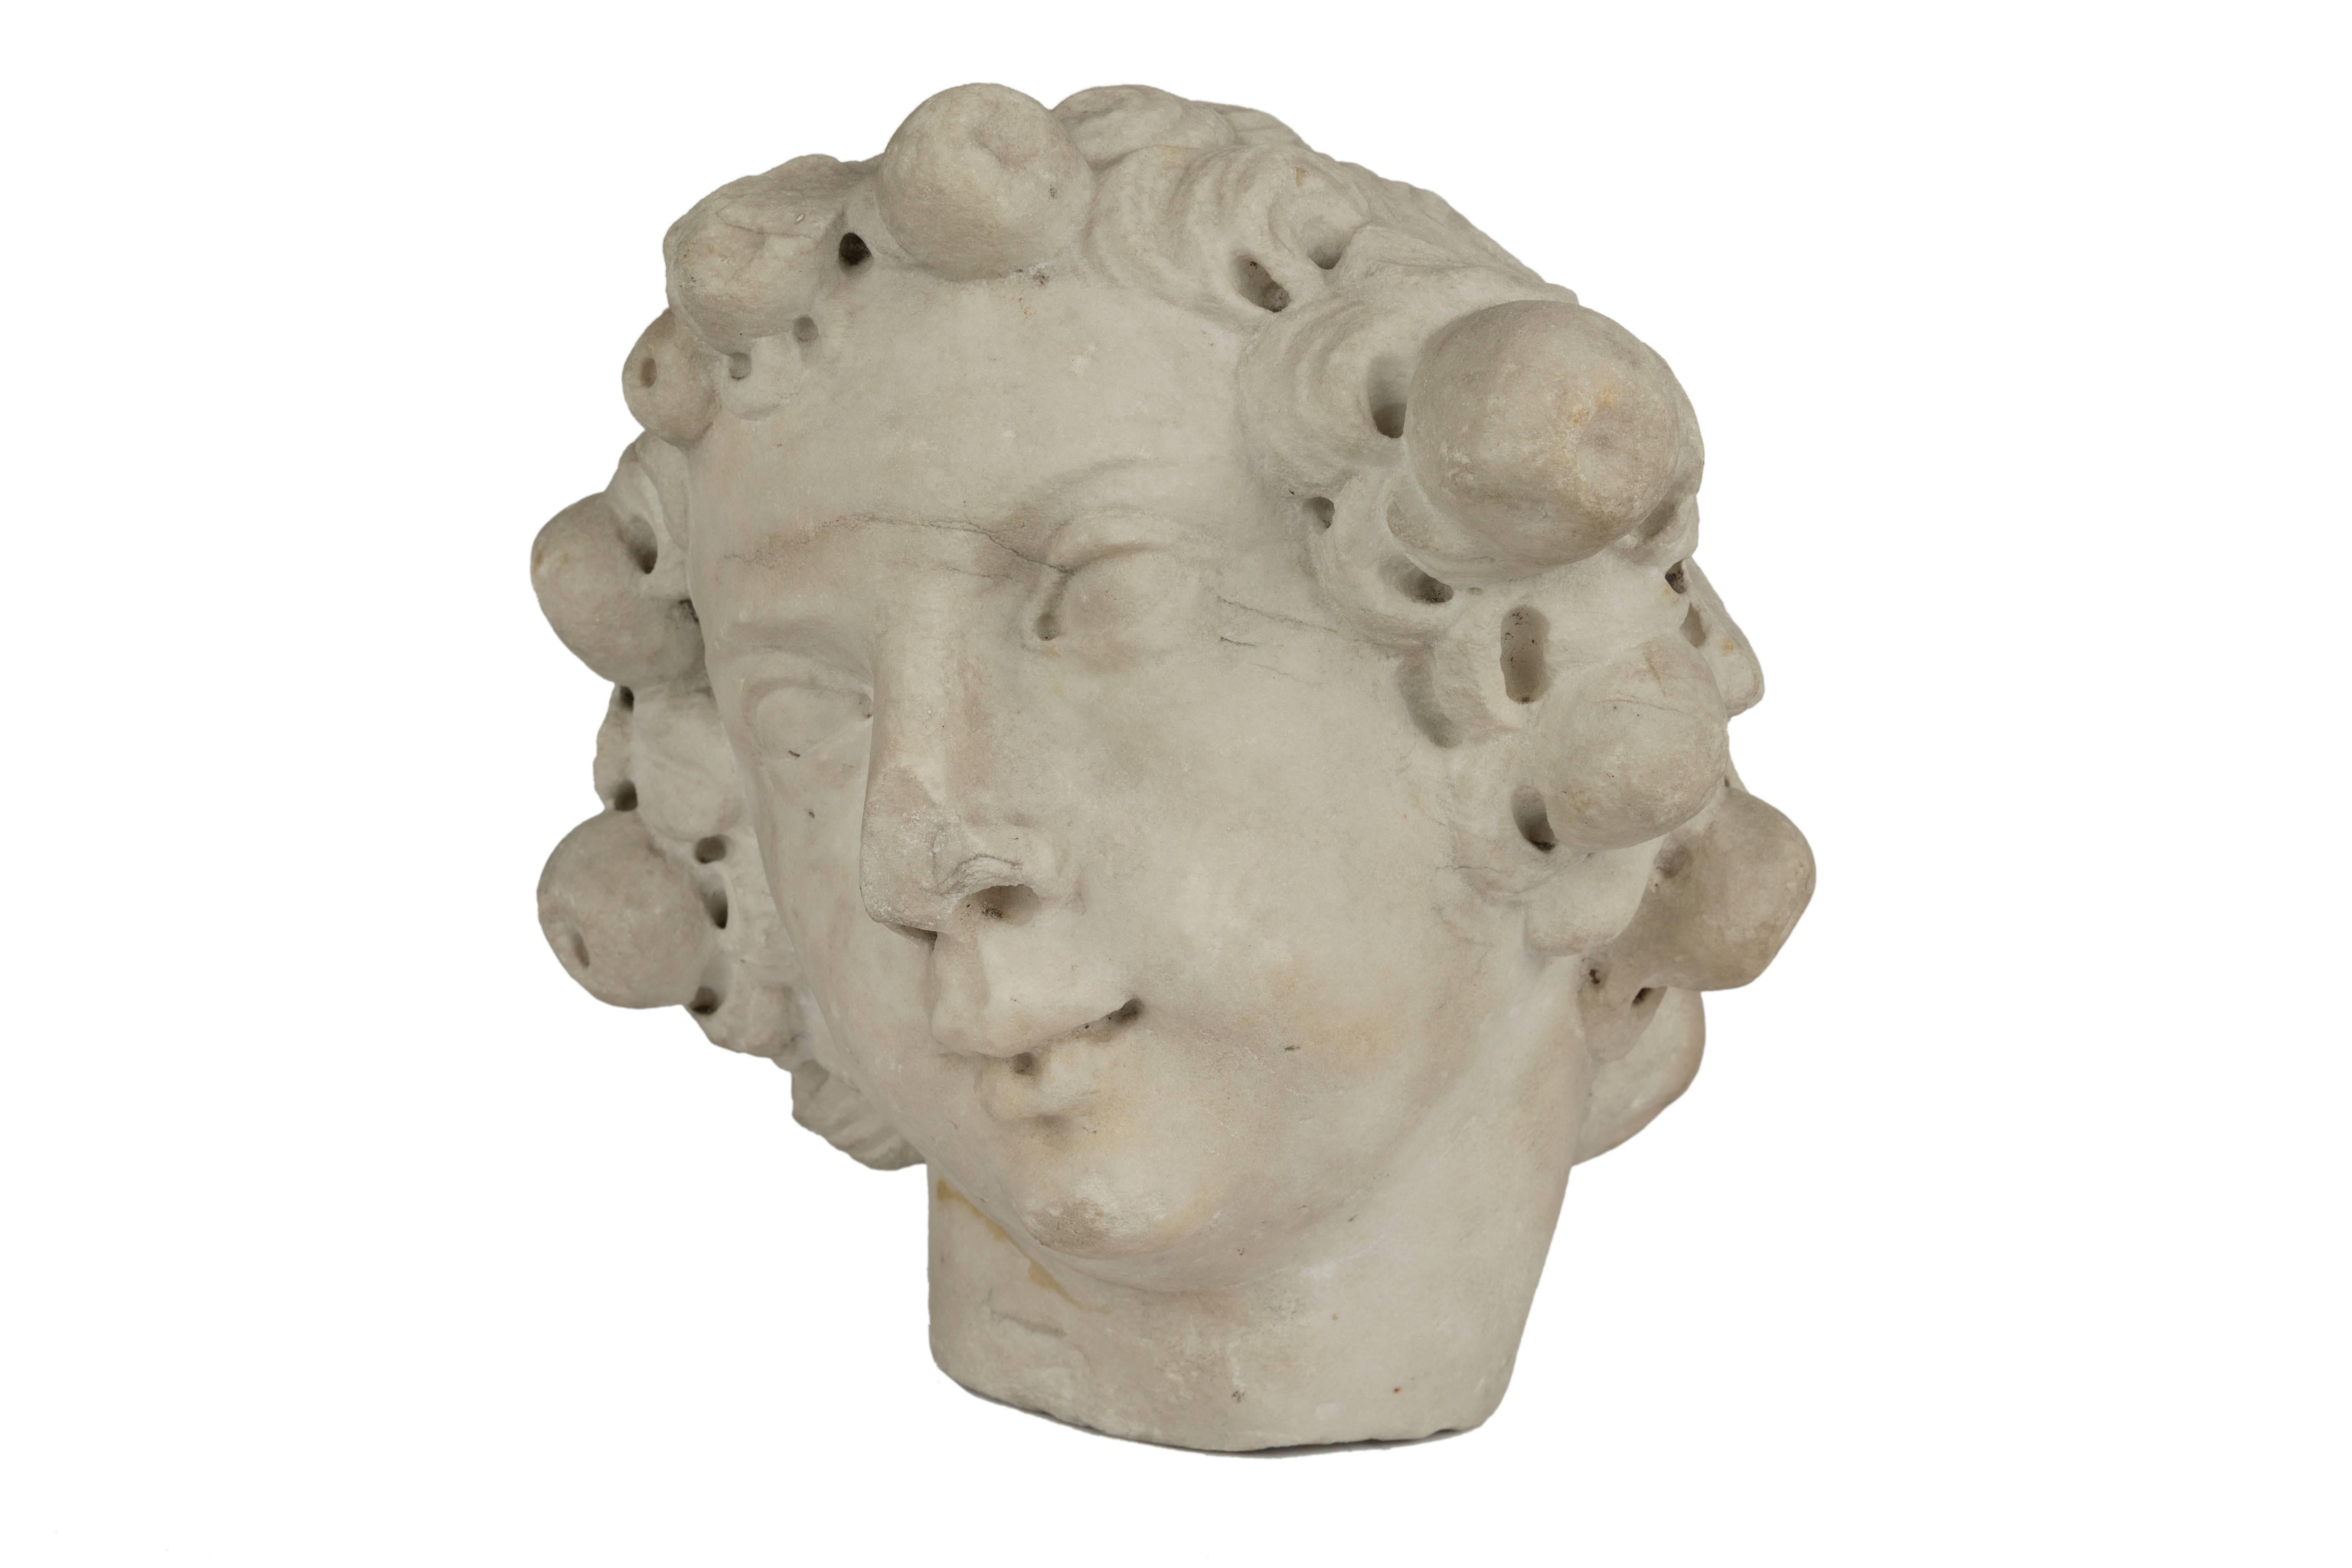 Head of Bacchic figure
white marble
Italy, late 16th-early 17th century
with fitted pedestal
Measures: H 9.5 in (24.3cm).